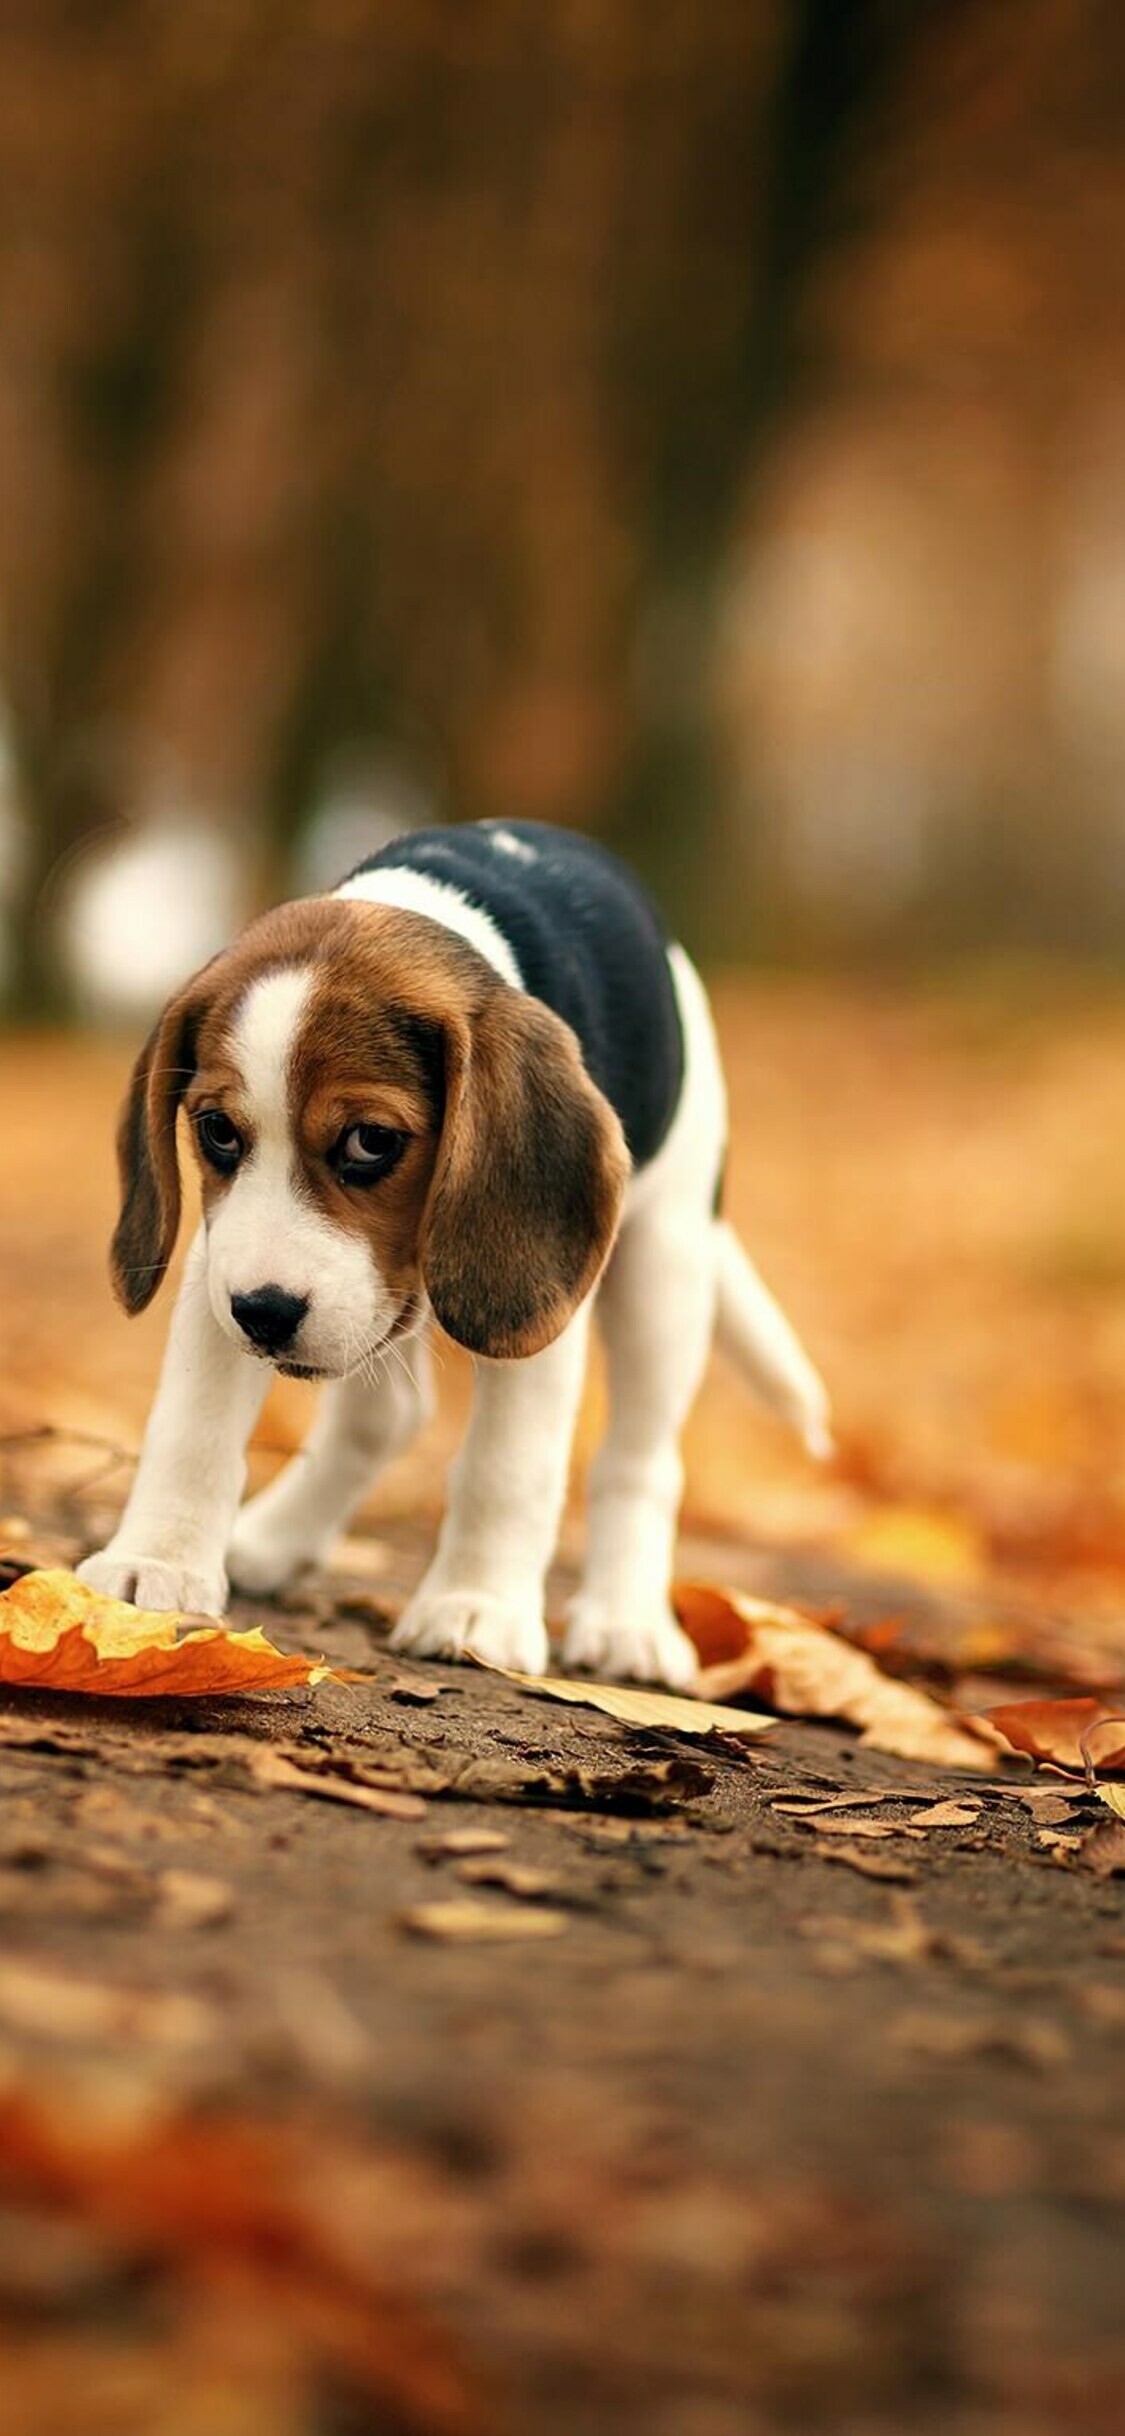 Beagle: The breed has one of the best developed senses of smell of any dog. 1130x2440 HD Wallpaper.